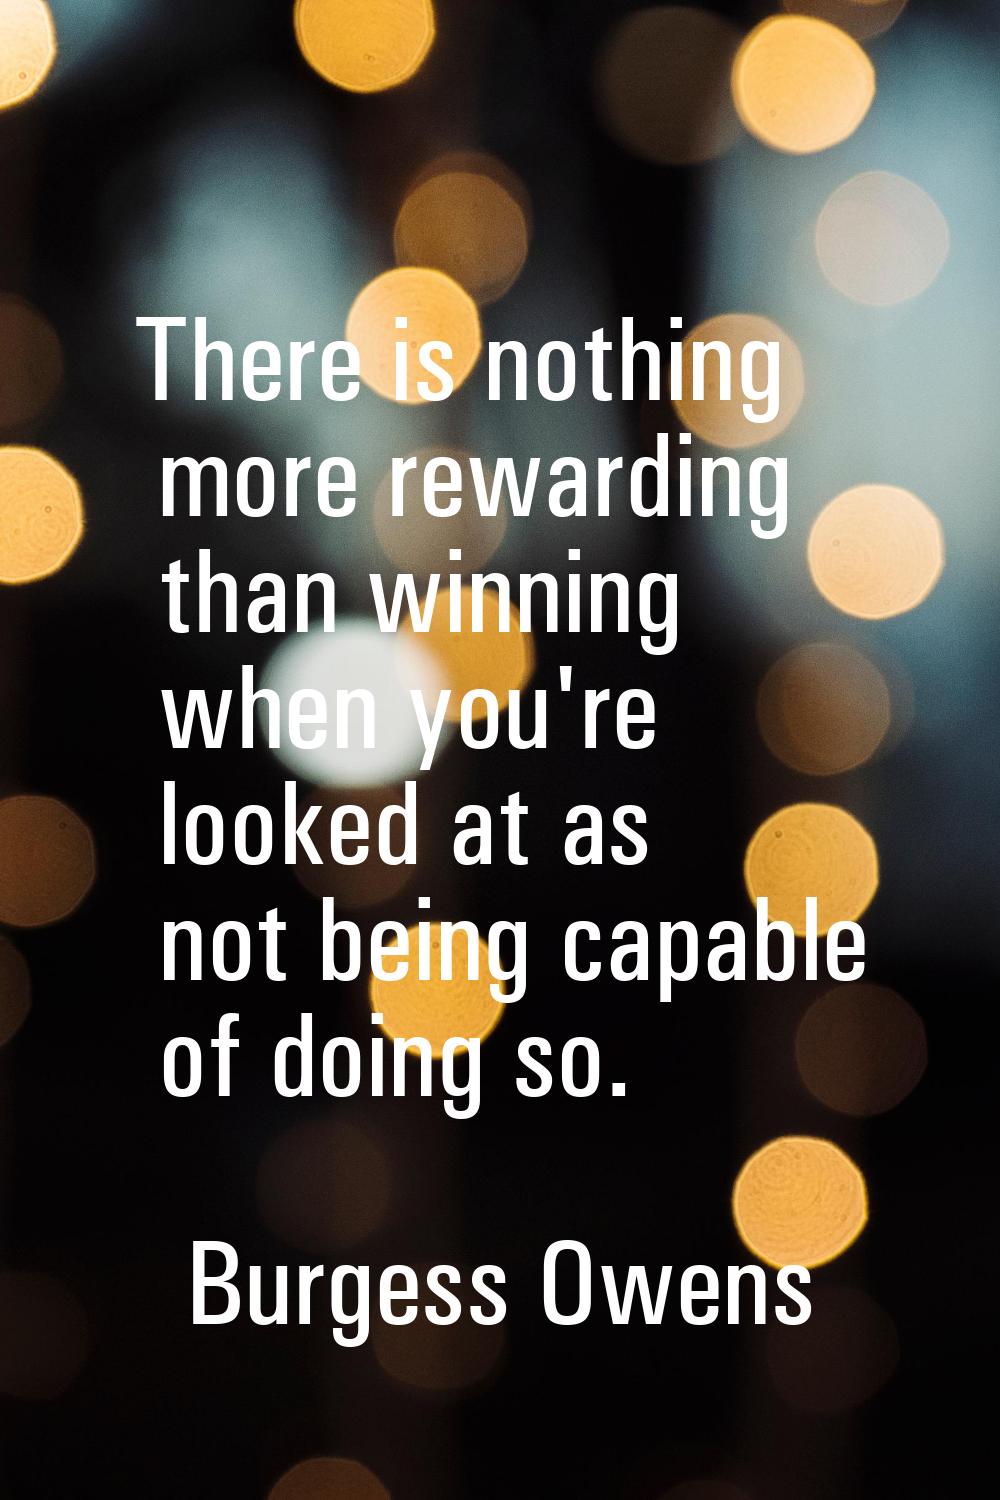 There is nothing more rewarding than winning when you're looked at as not being capable of doing so